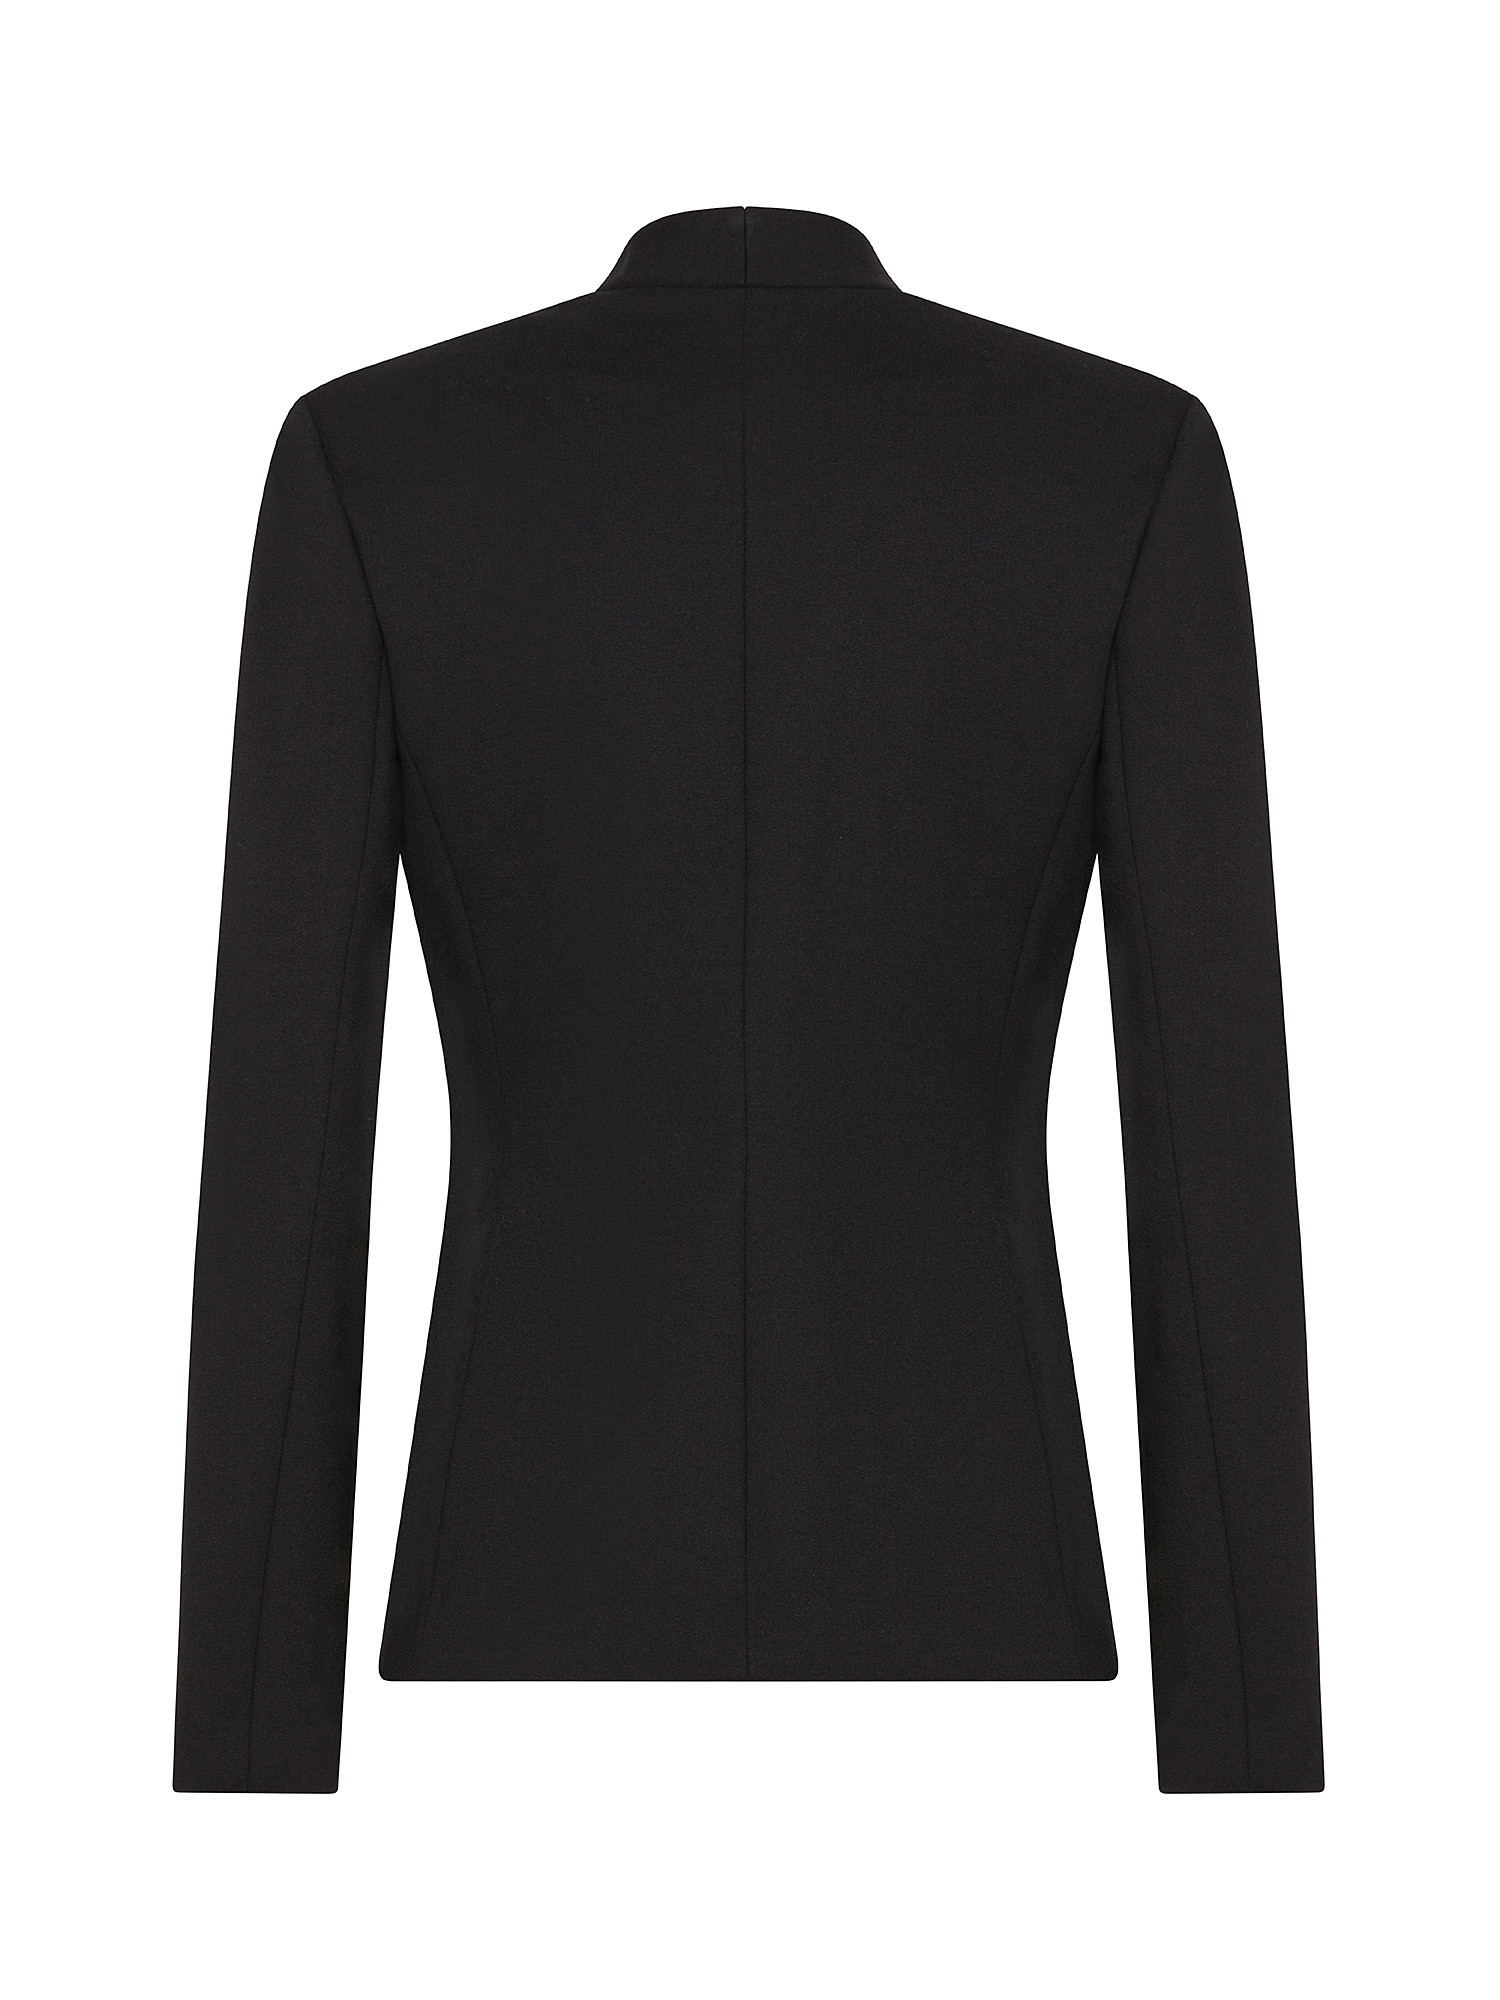 Emporio Armani - Blazer in Milano stitch fabric with buckle, Black, large image number 1